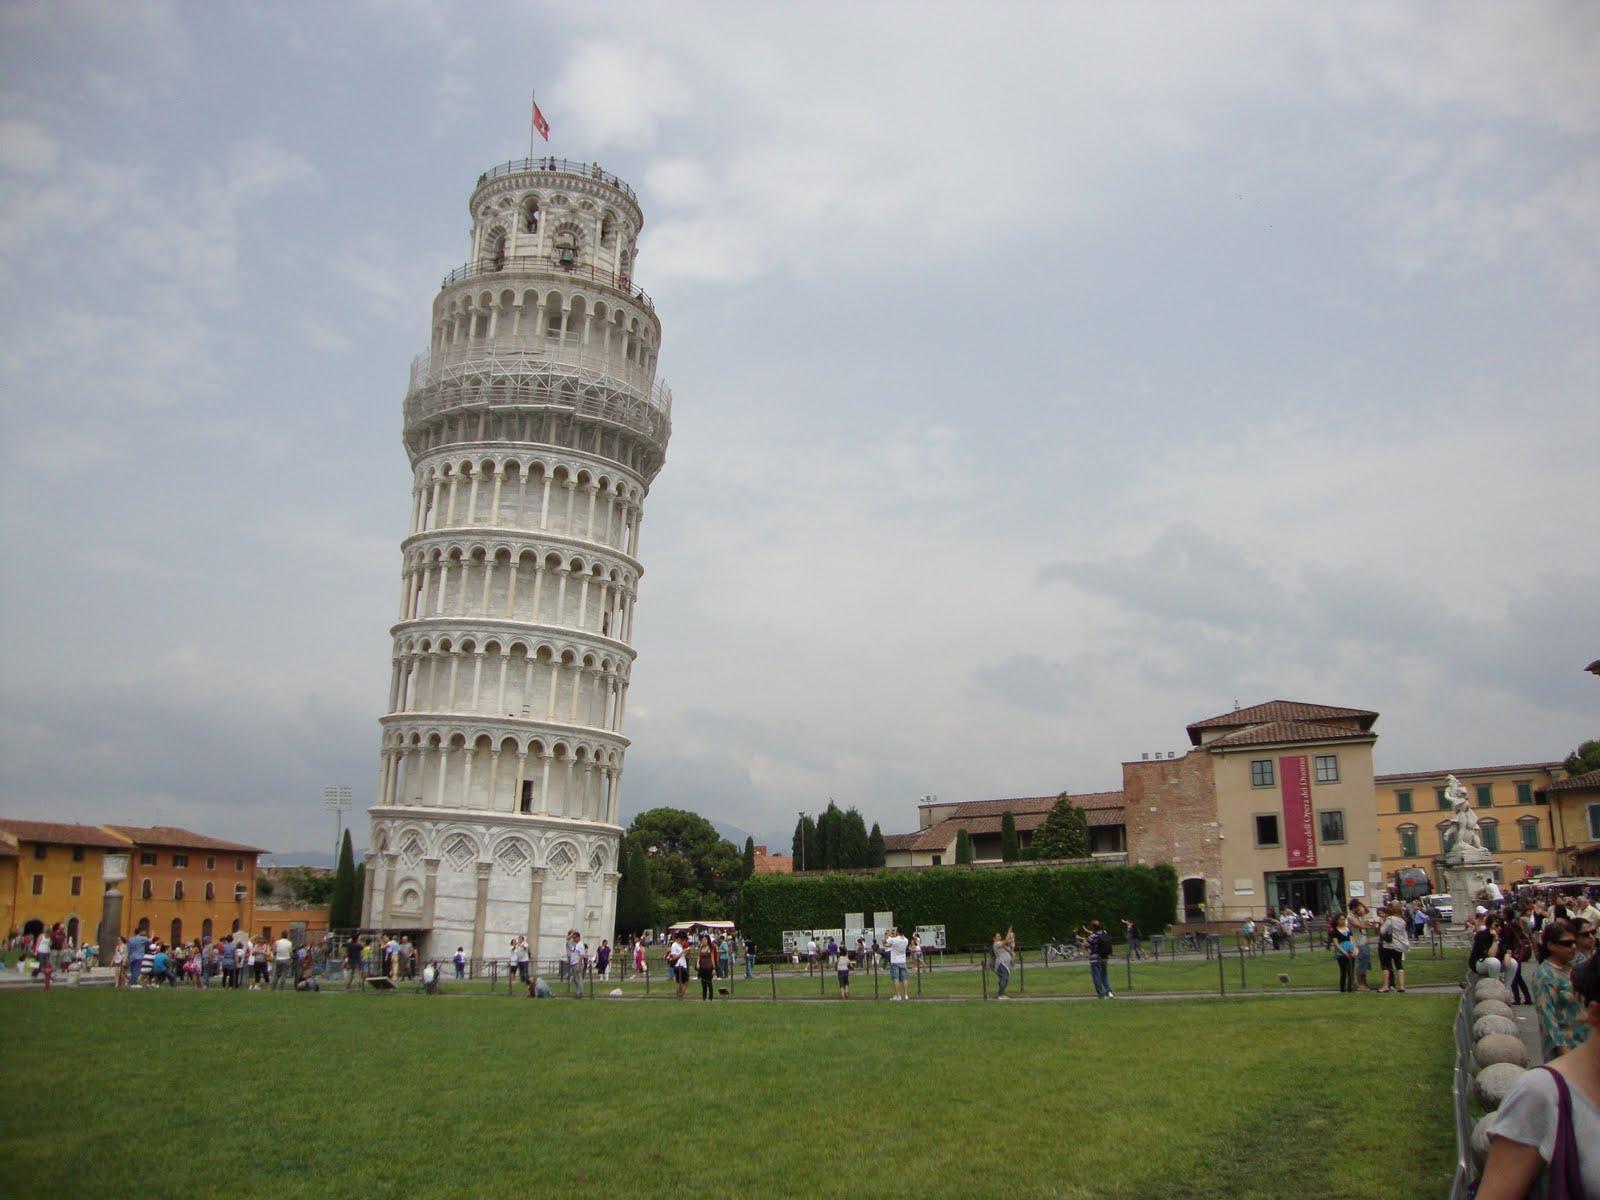 Wanderlust.: The Leaning Tower of Pisa.It Really Leans That Much